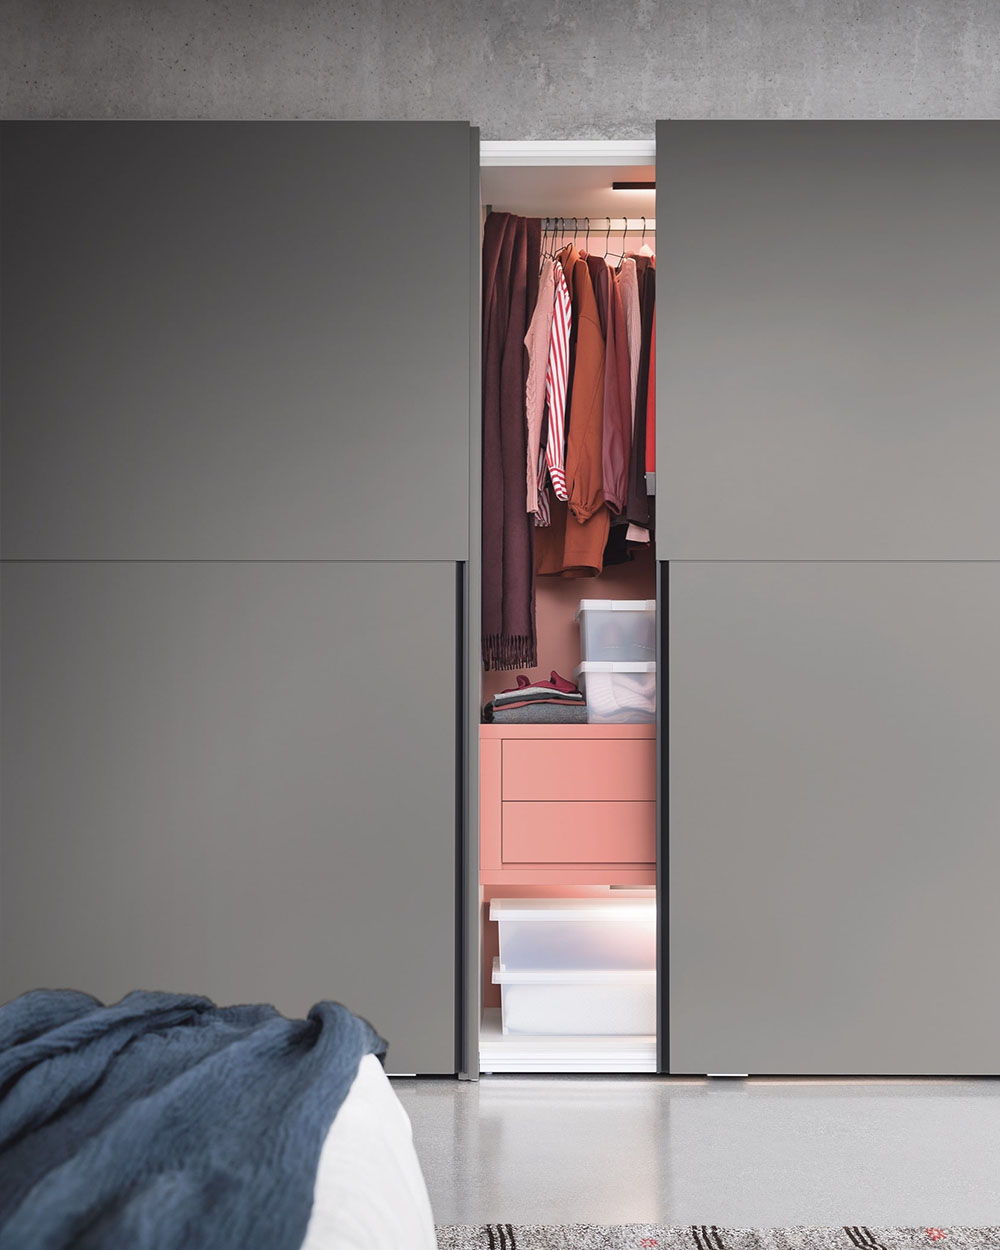 A balanced and minimal designed sliding wardrobe, designed in Italy, fitted to your home by Krieder.